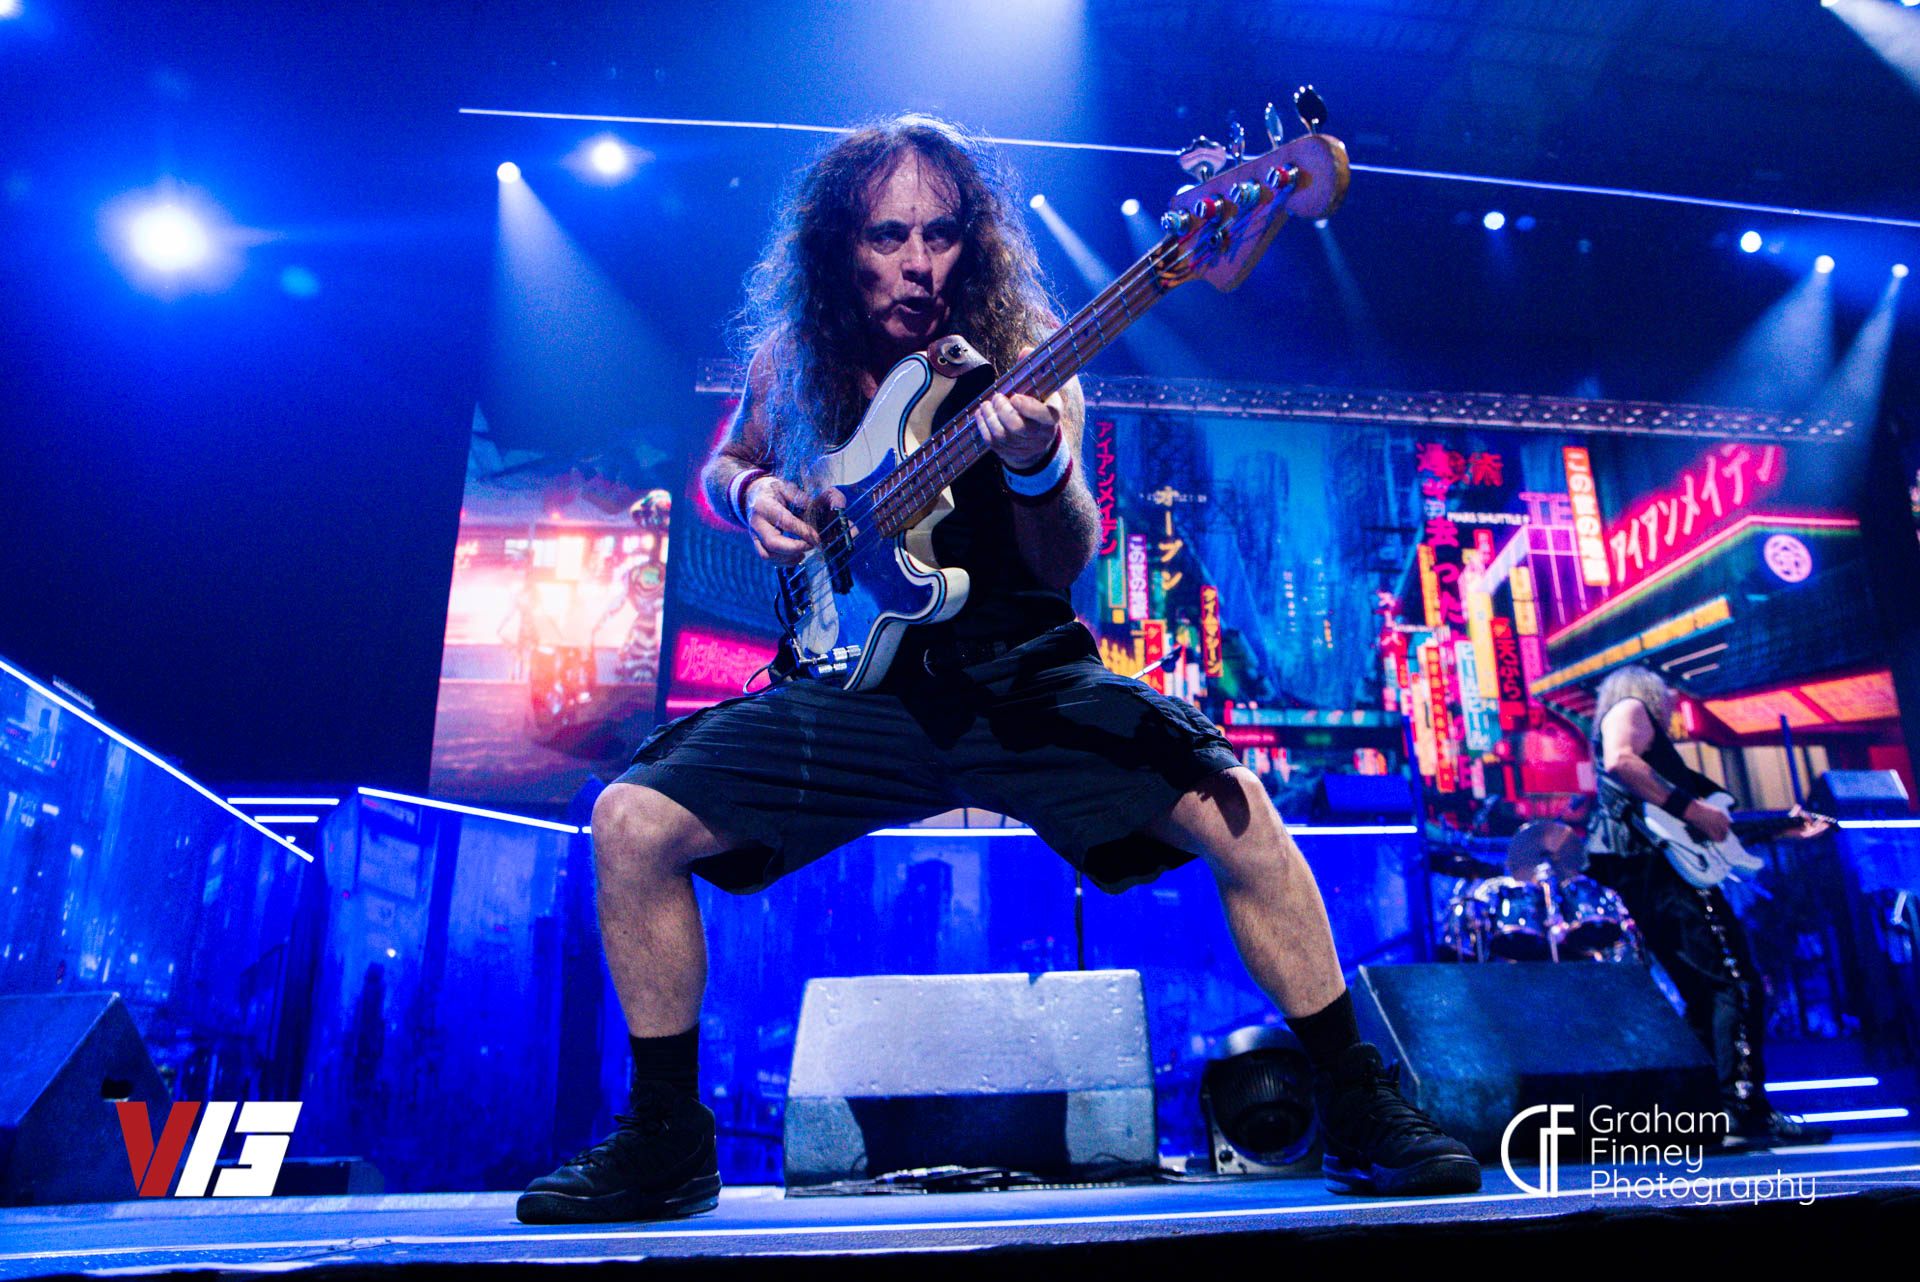 Iron Maiden @ Leeds FD Arena by Graham Finney Photography